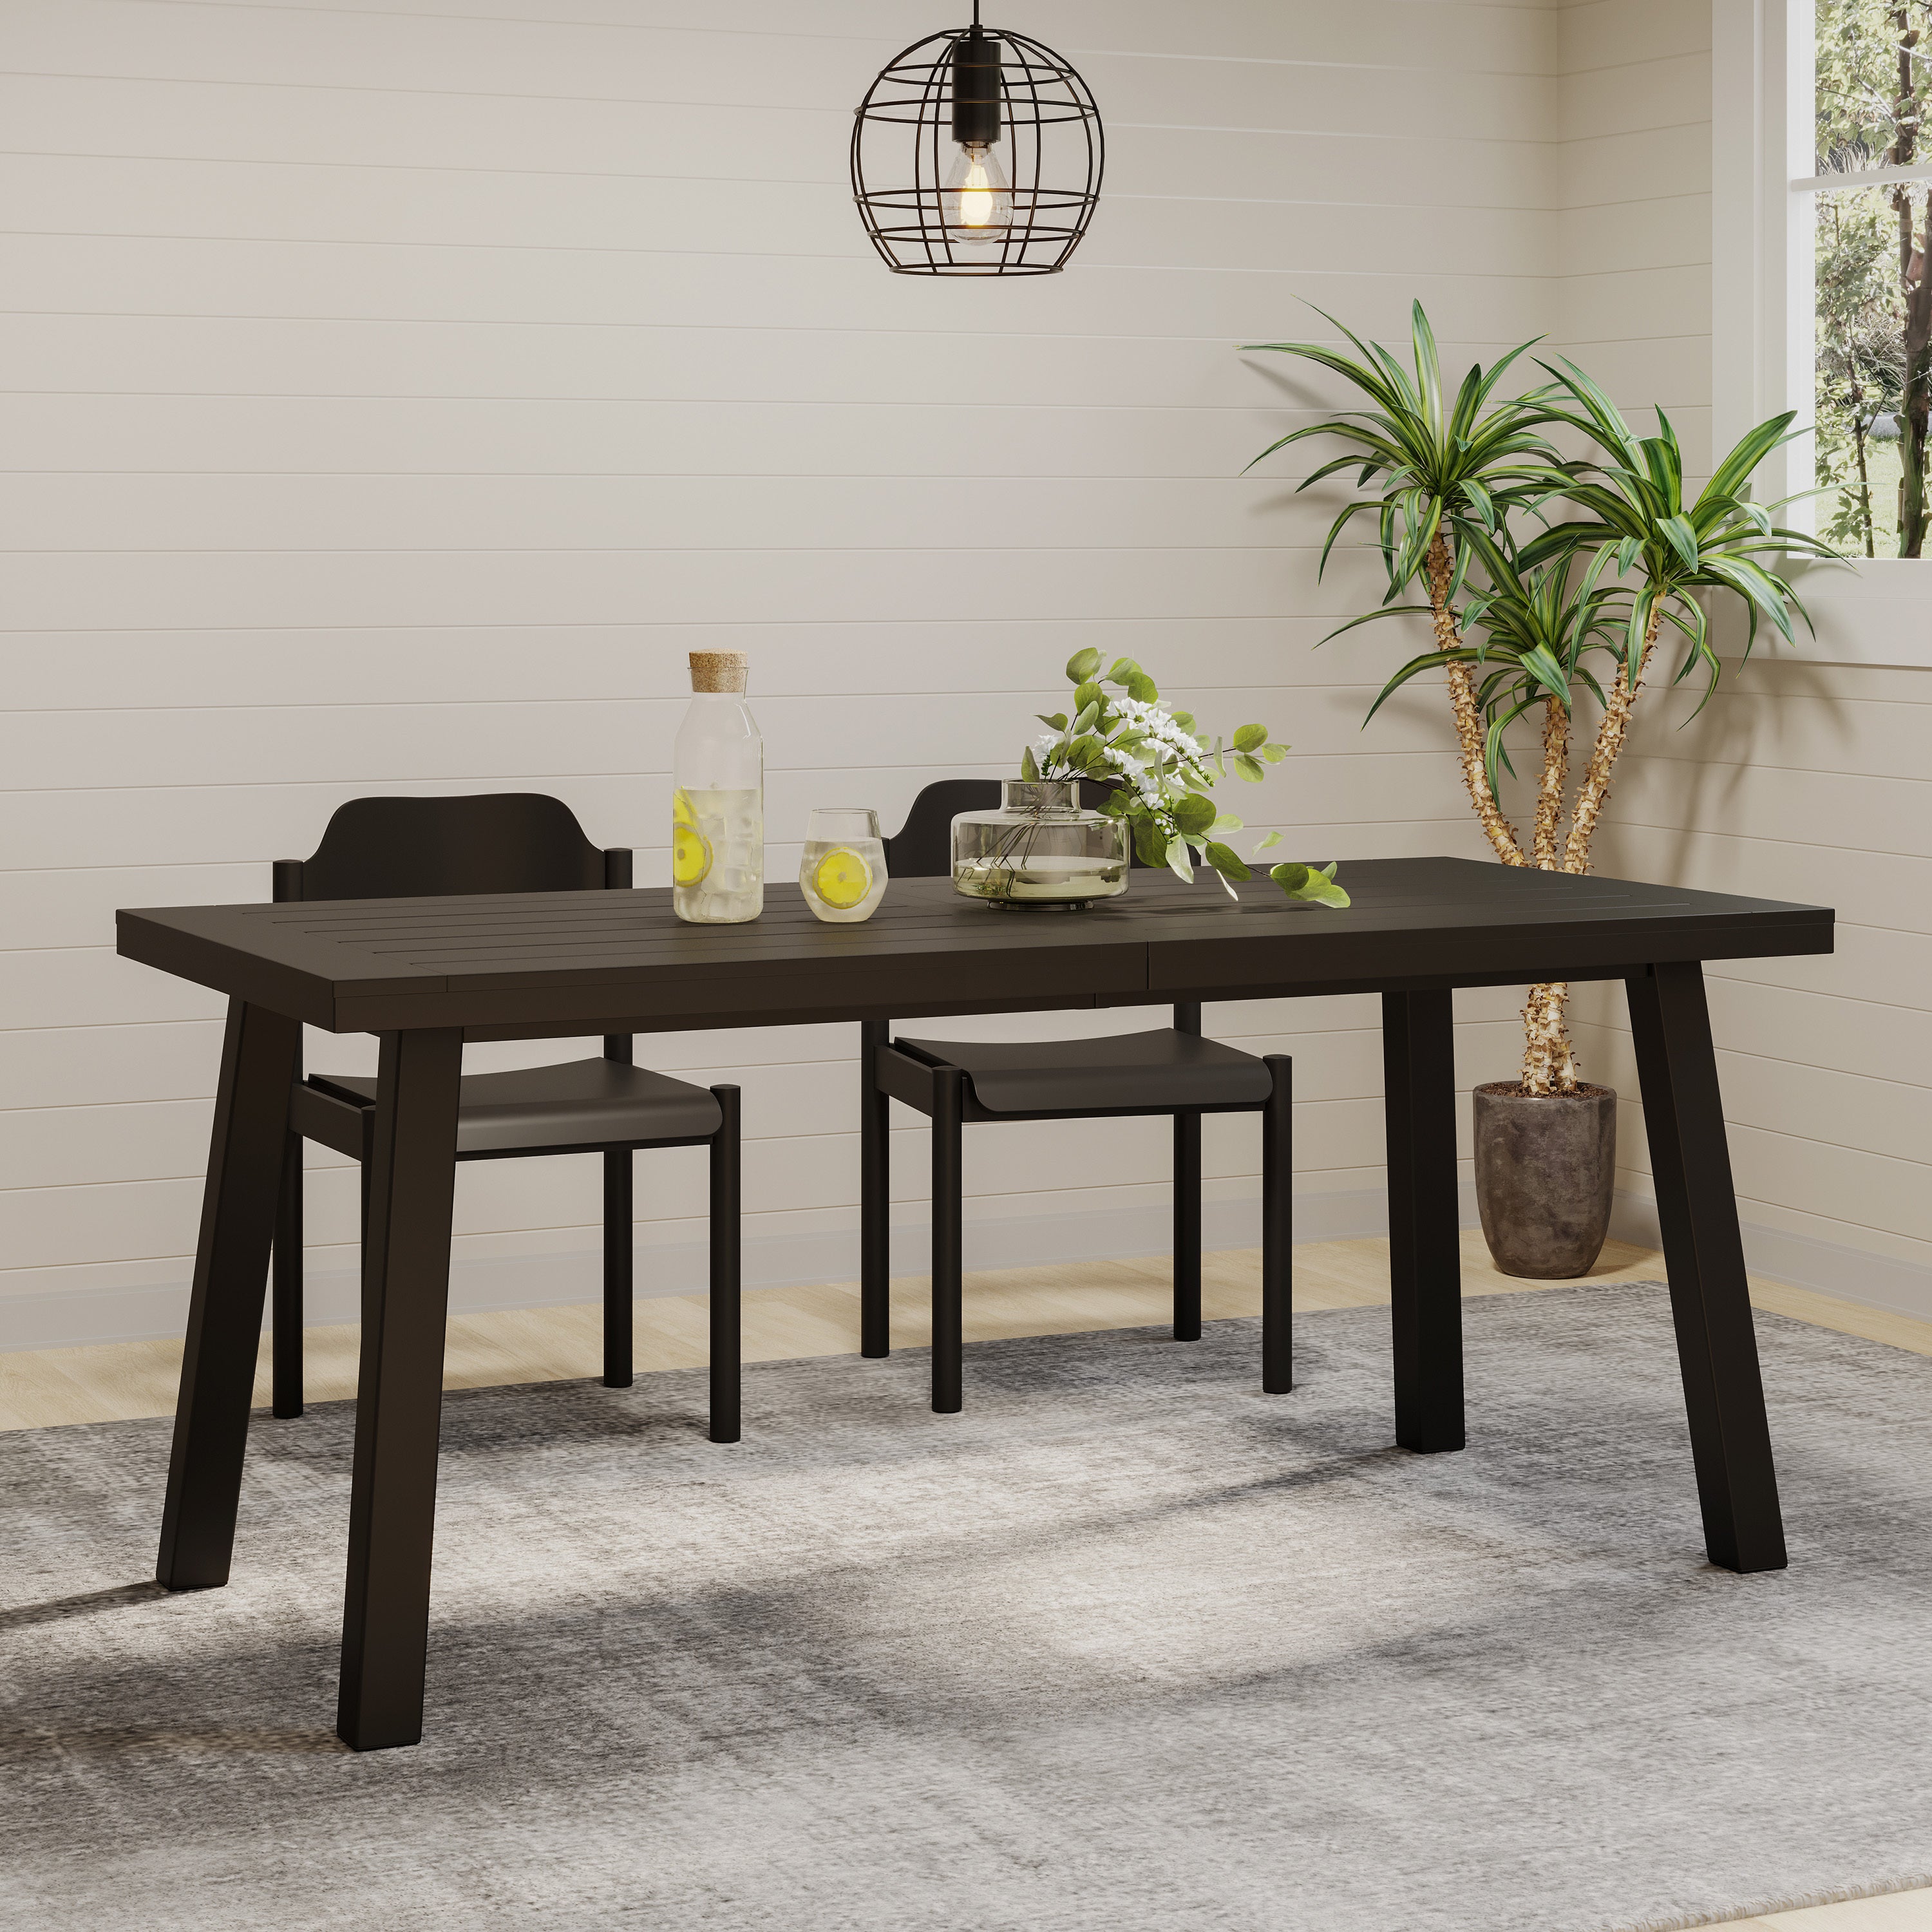 Tm-Home-Acacia-Dining-Table,-Black-Kitchen-&-Dining-Room-Tables